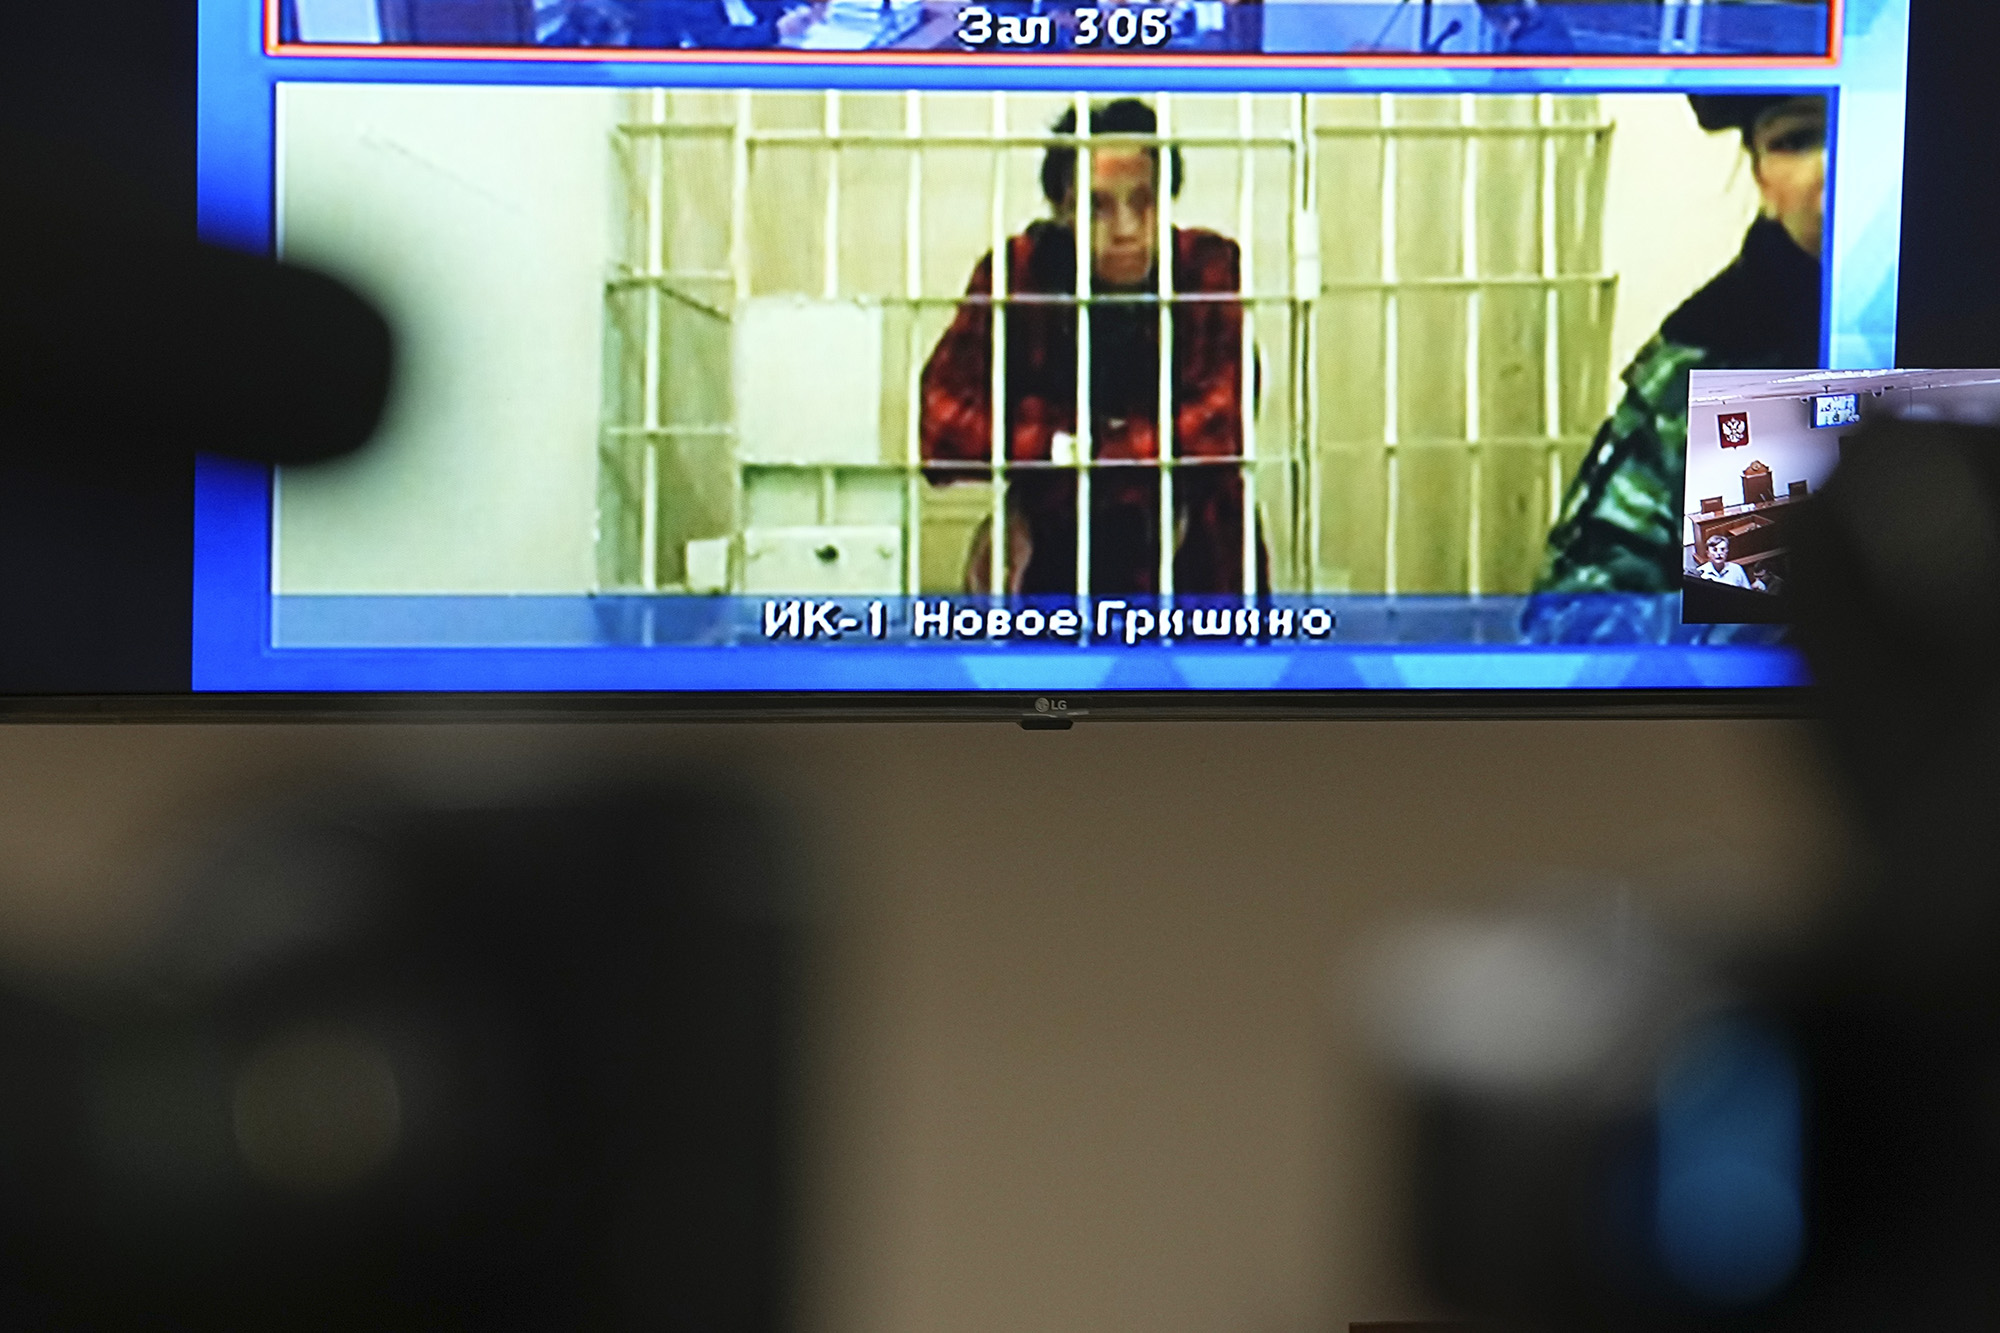 Brittney Griner is seen on the bottom part of a TV screen as she waits to appear in a video link provided by the Russian Federal Penitentiary Service prior to a hearing at the Moscow Regional Court in Moscow, Russia, on October 25.